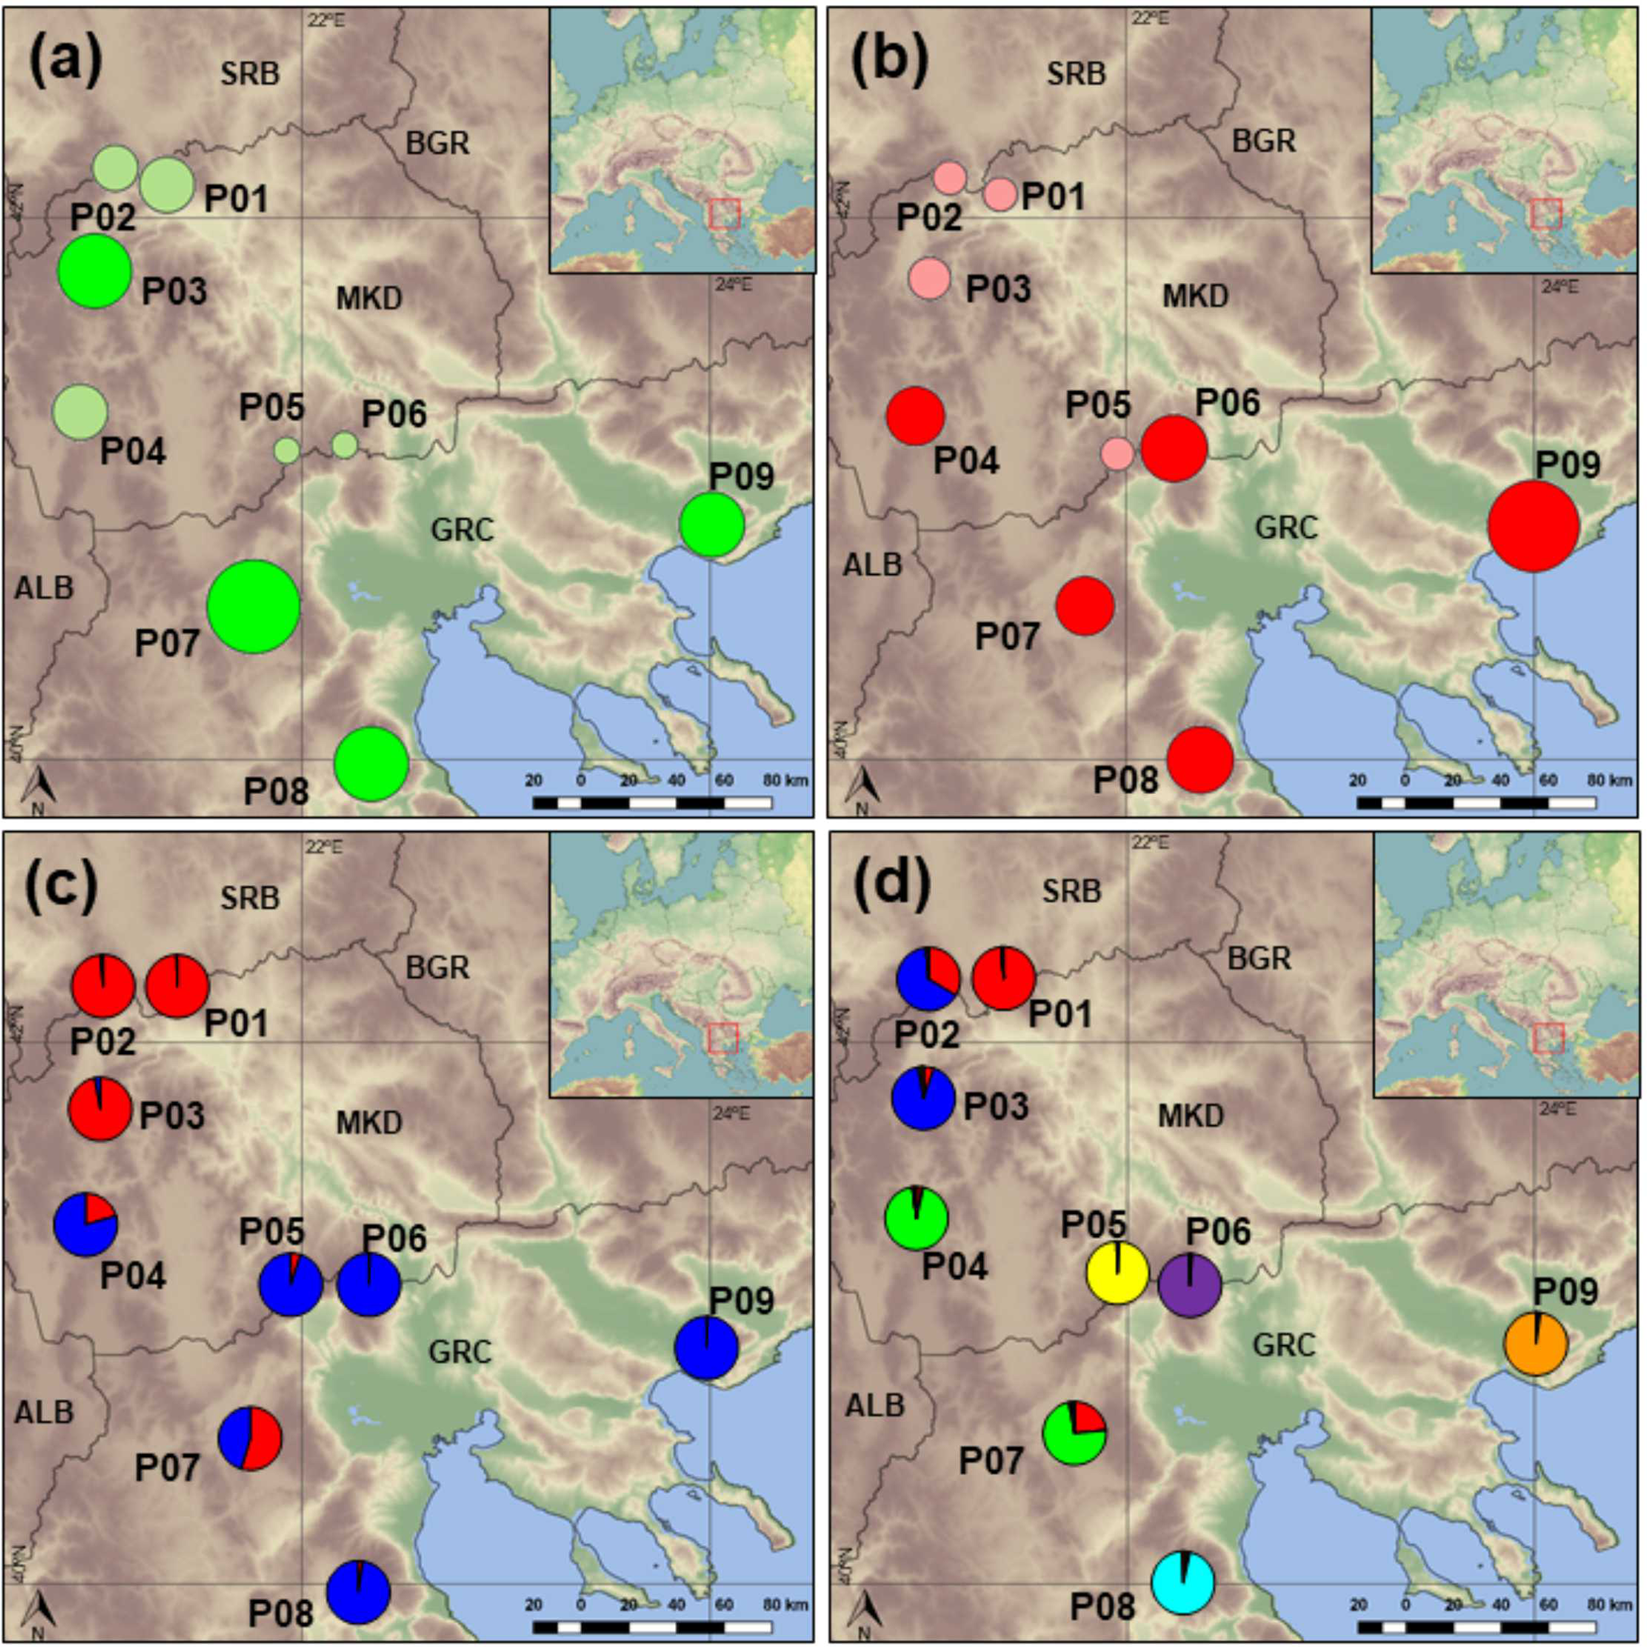 Divergent selection and genetic structure of Sideritis scardica populations  from southern Balkan Peninsula as revealed by AFLP fingerprinting |  Scientific Reports